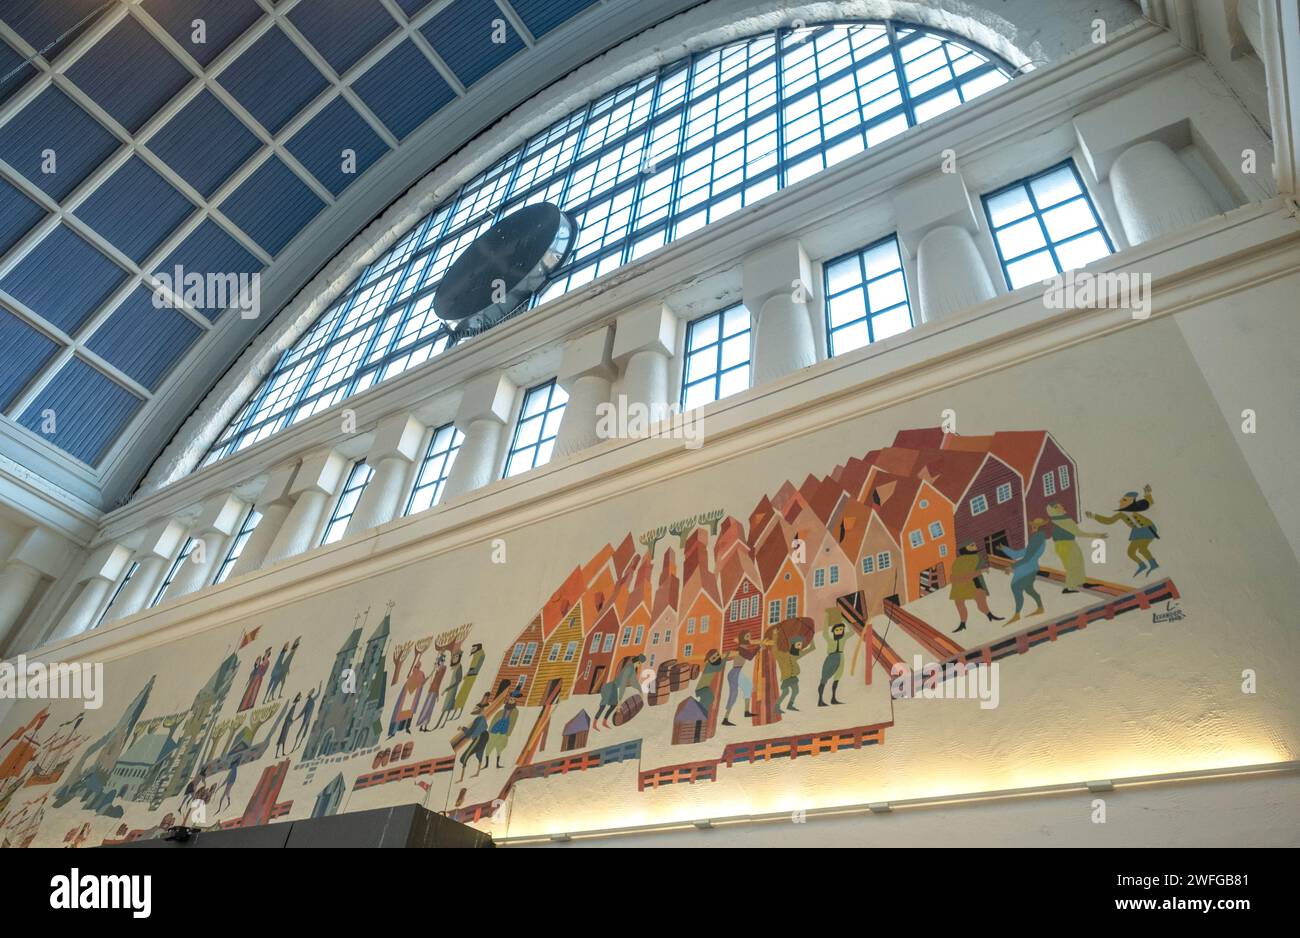 Murals on the wall of Bergen train station, Bergen, Norway Stock Photo